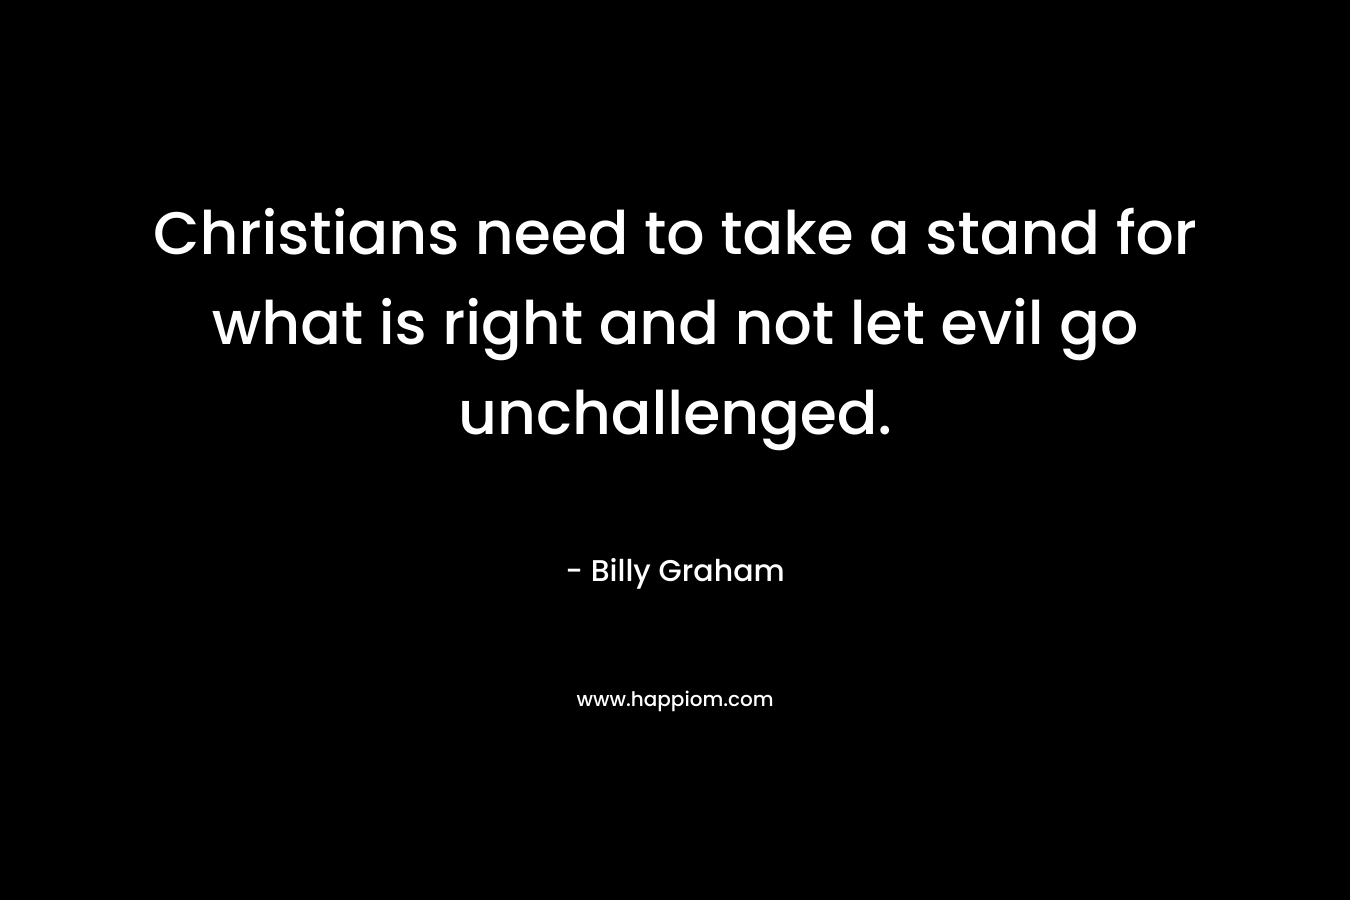 Christians need to take a stand for what is right and not let evil go unchallenged.